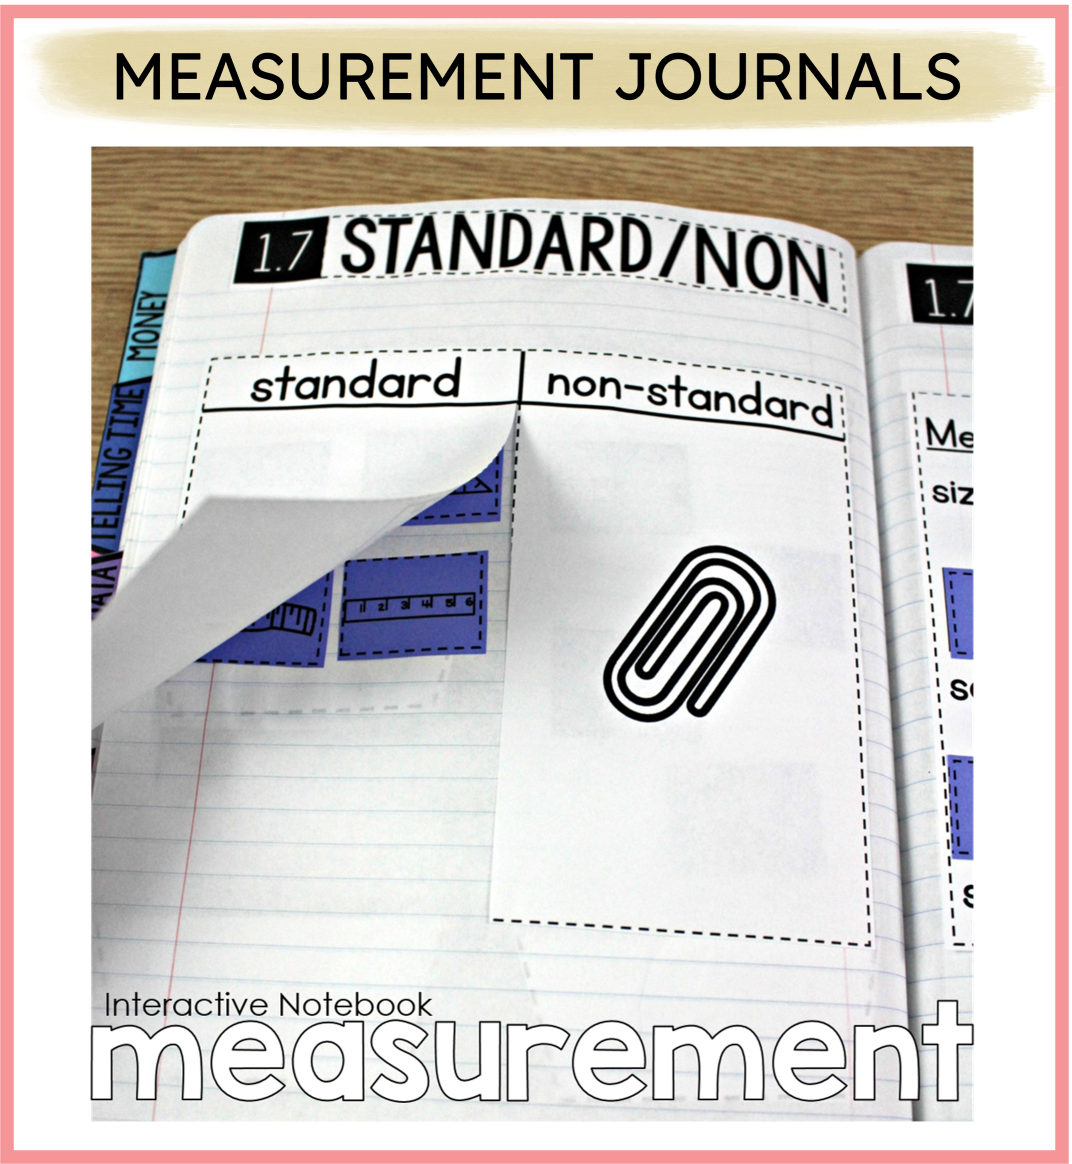 An image of a math composition book activity on standard and non-standard measurement tools. 